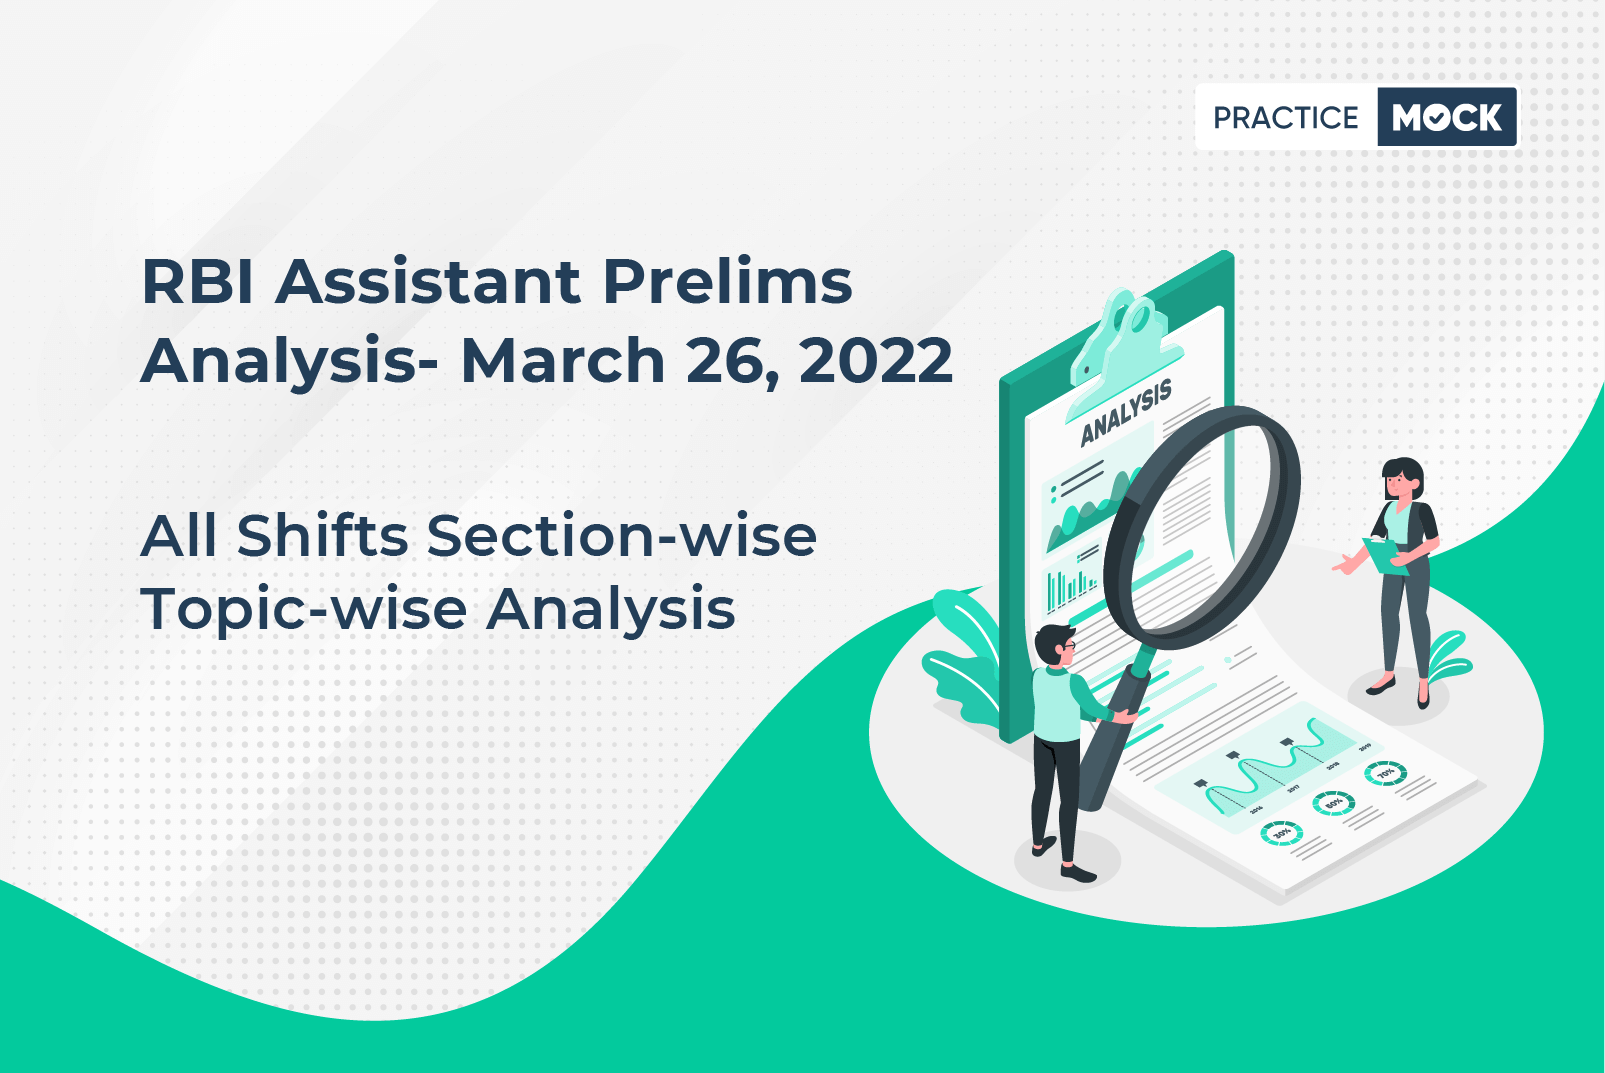 RBI Assistant Prelims Analysis- March 26, 2022- All Shifts Section-wise Topic-wise Analysis